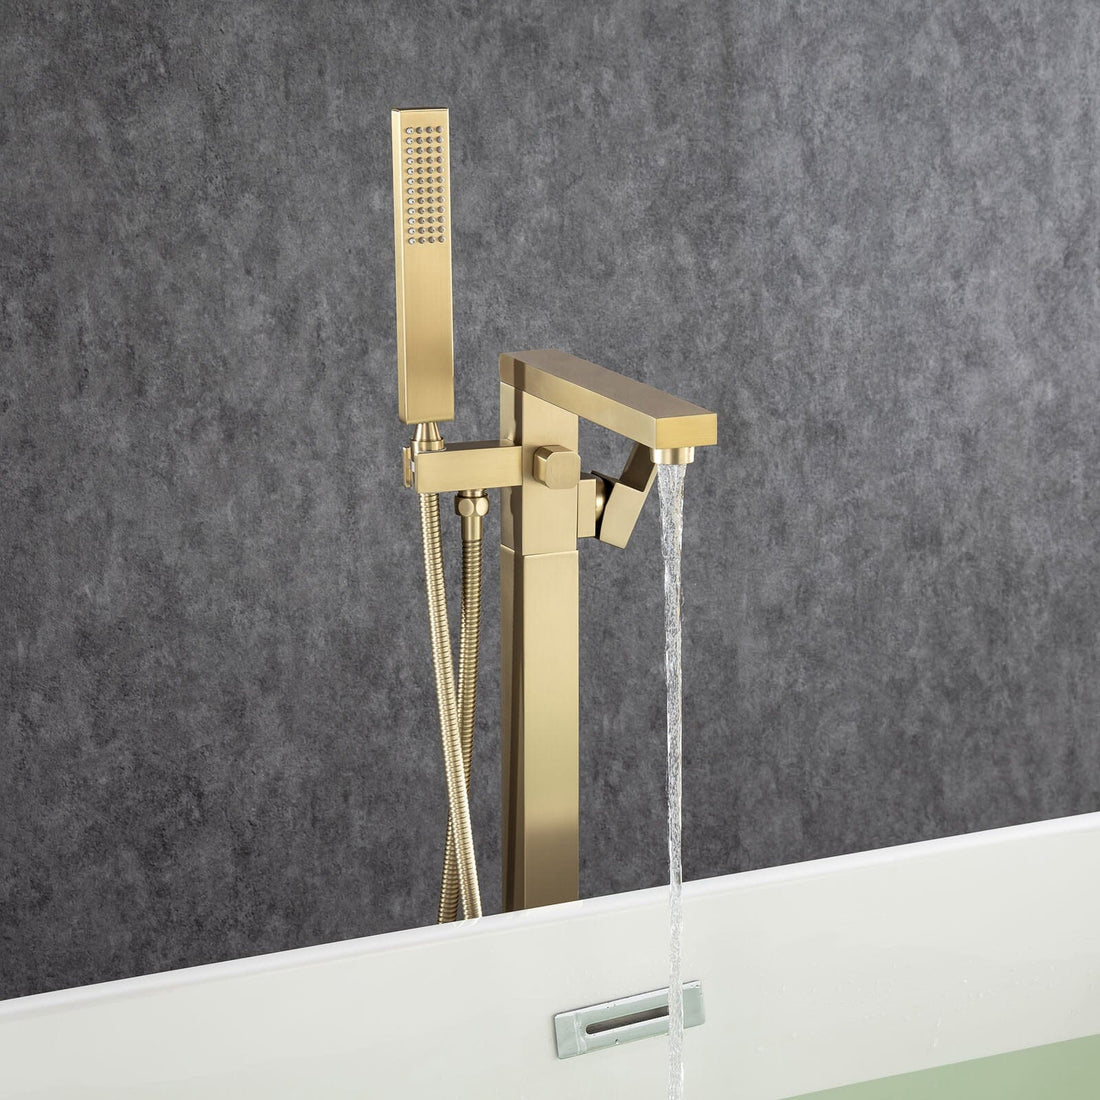 180° Rotation Brushed Gold Modern Freestanding Tub Filler Faucet with Hand Shower